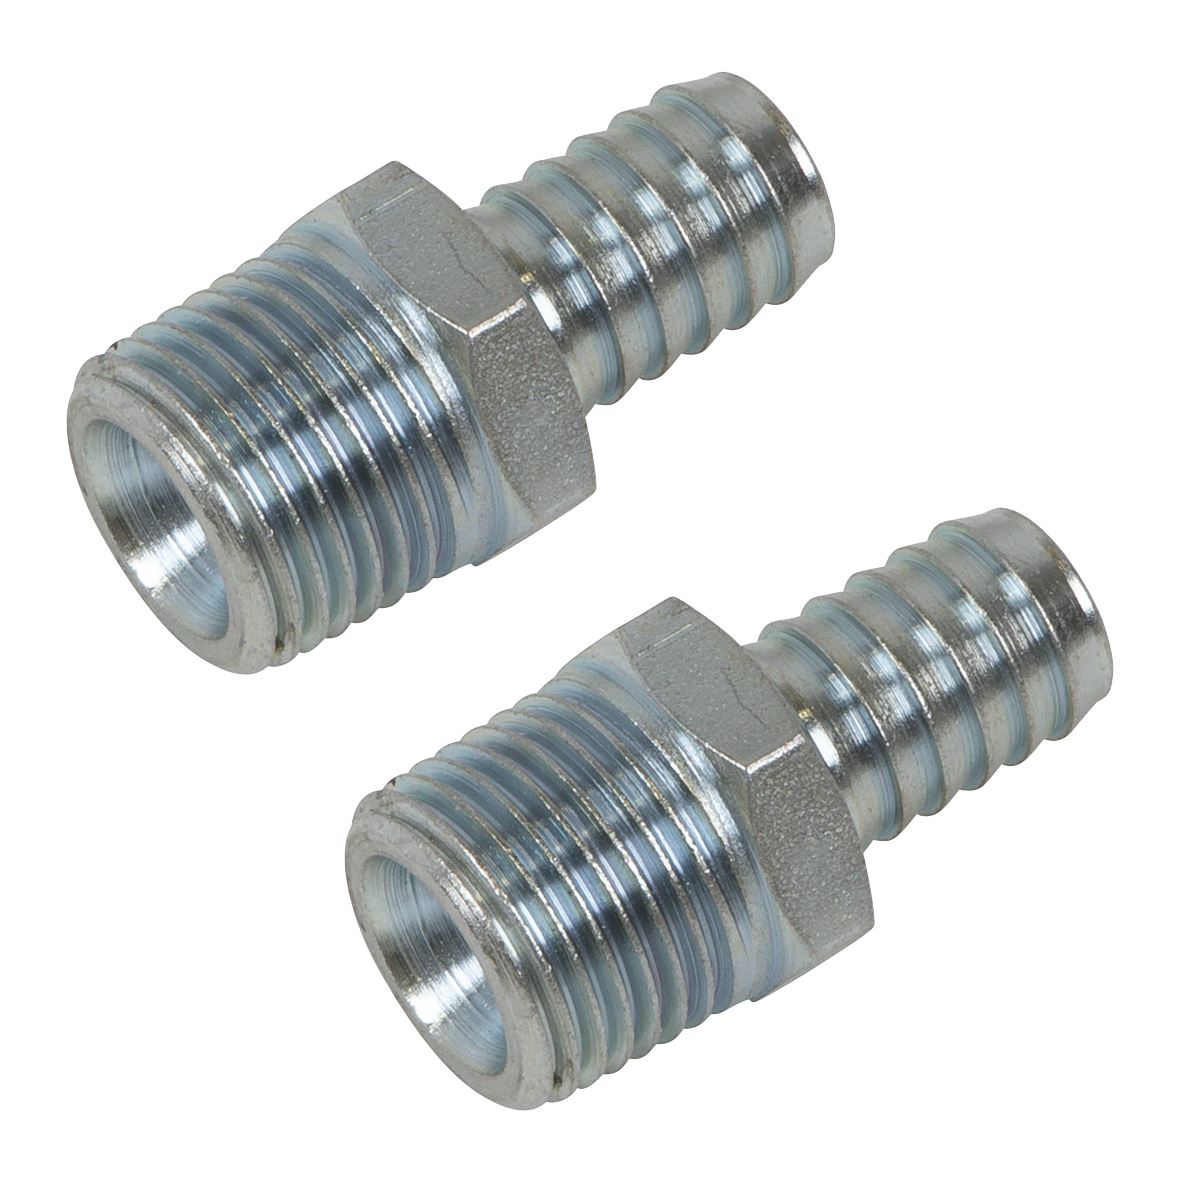 PCL Screwed Tailpiece Male 1/2"BSPT - Ø1/2" Hose - Pack of 2